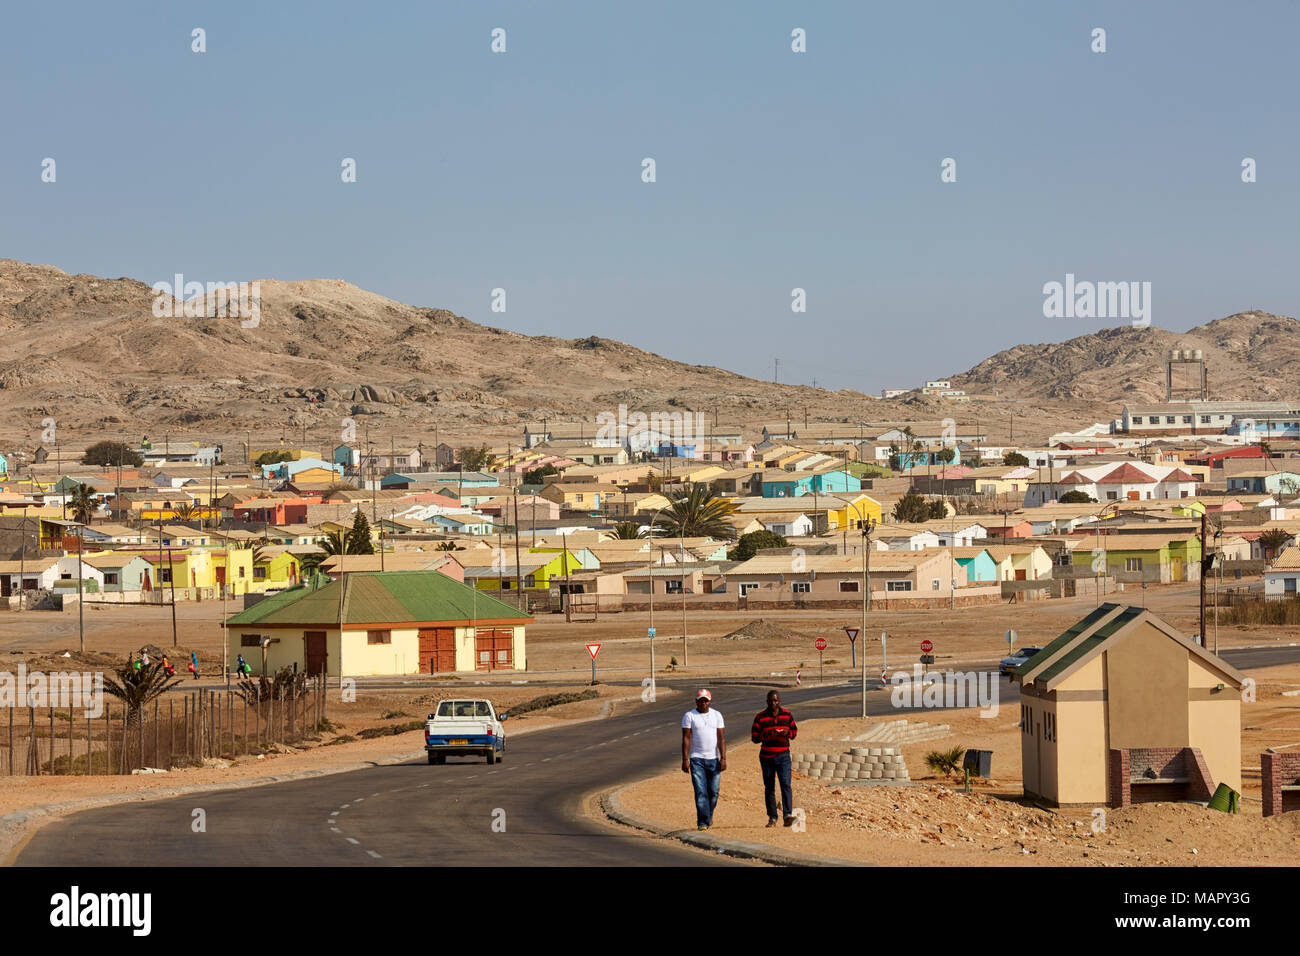 View of Luderitz showing colorful houses, Namibia, Africa Stock Photo